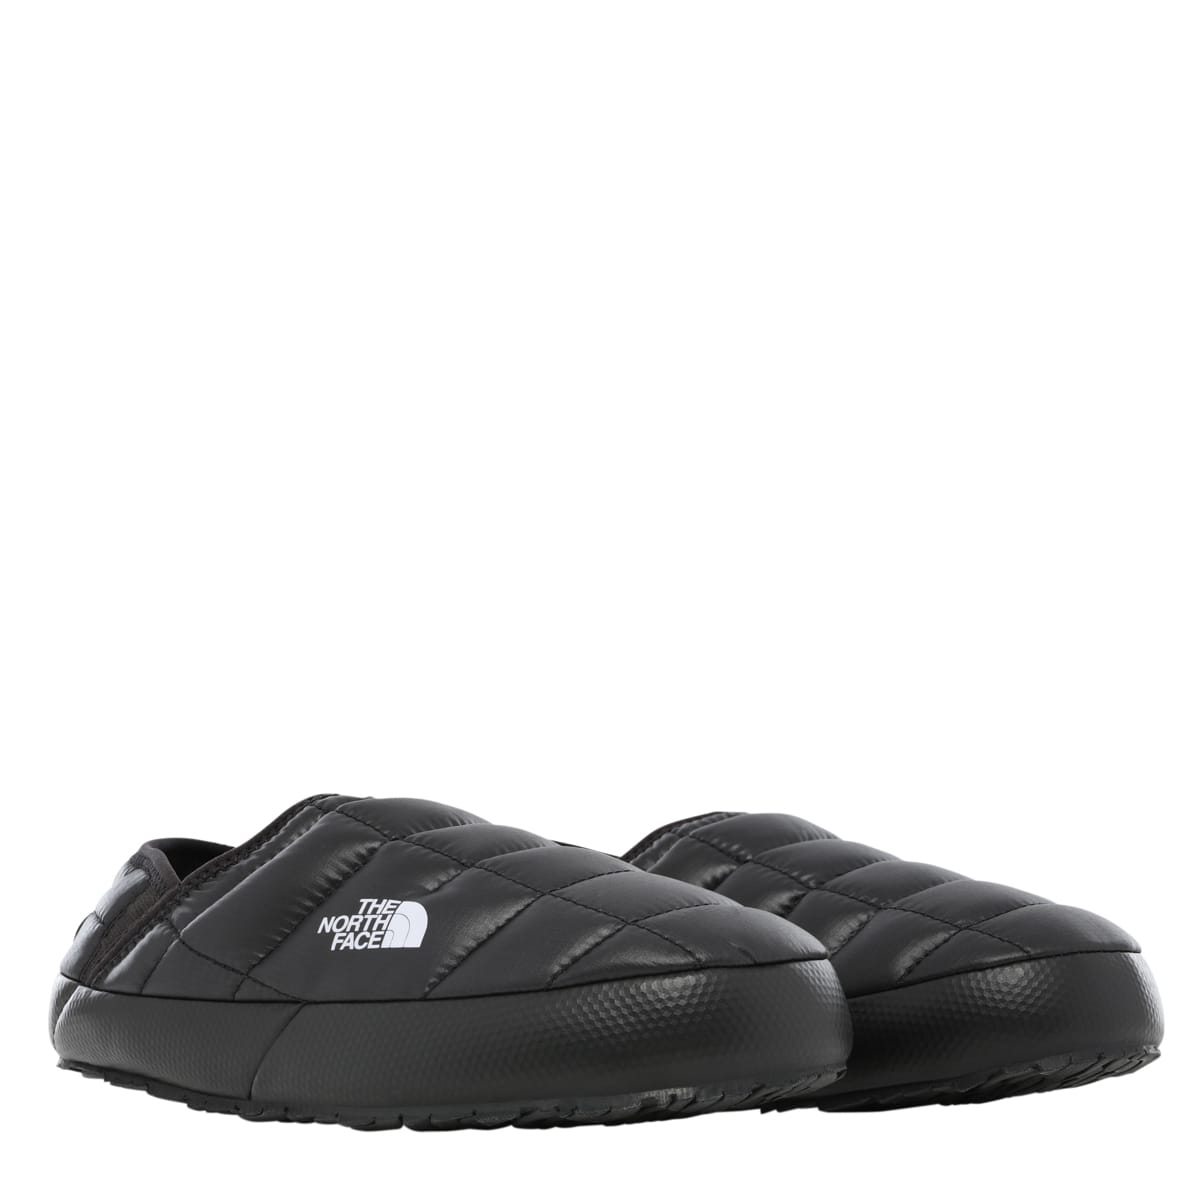 The North Face Women's Thermoball Traction Mule V Tnf Black/Tnf Black